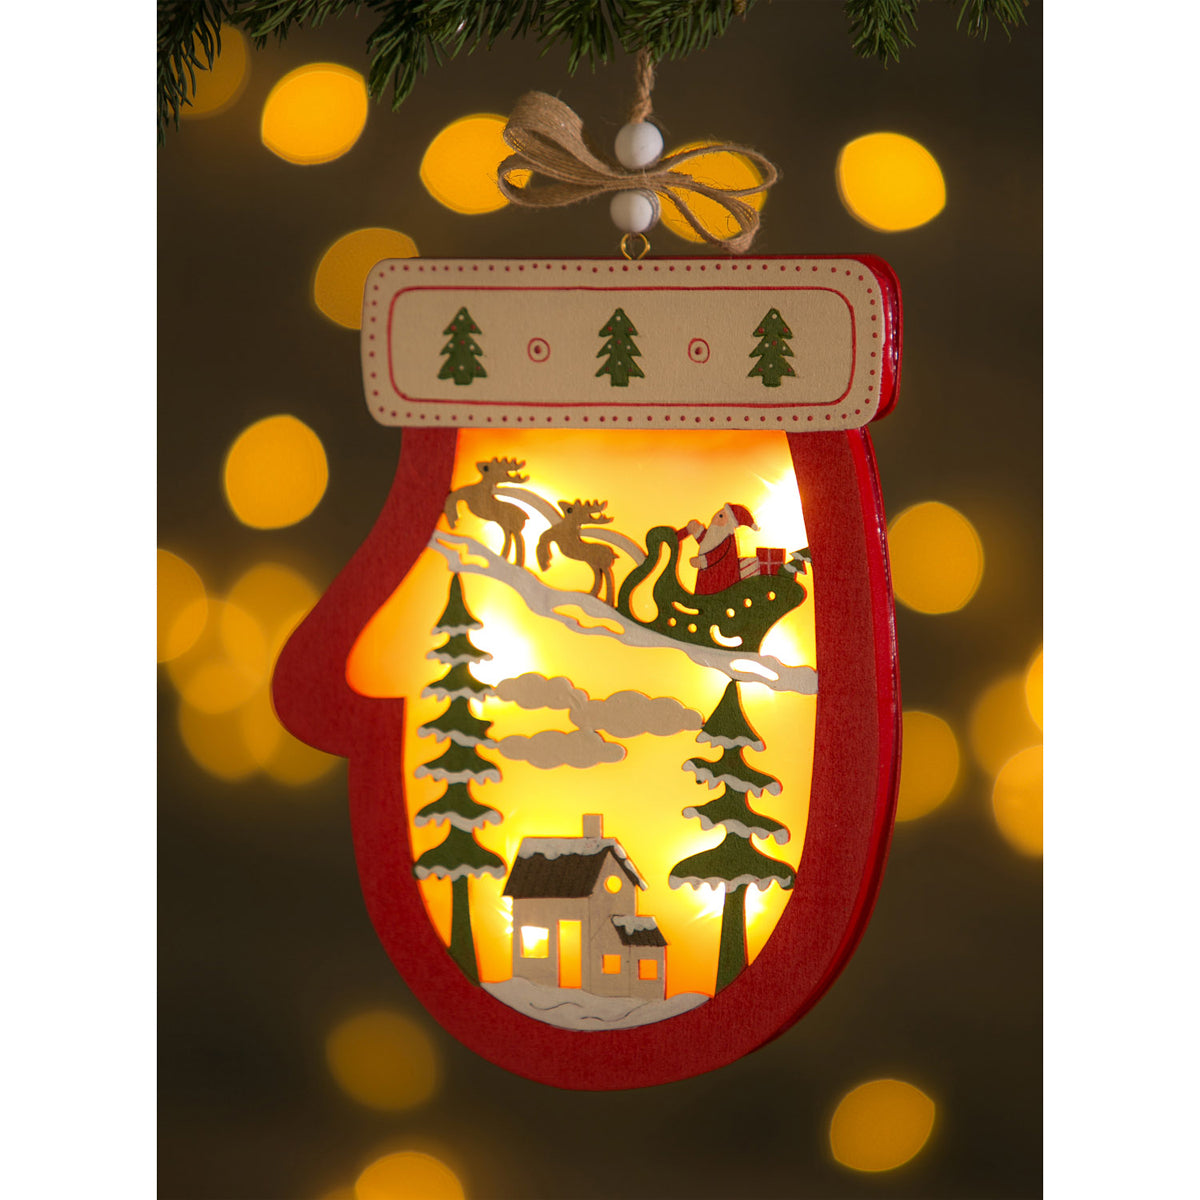 Wooden Ornaments, (LED), 2 Styles